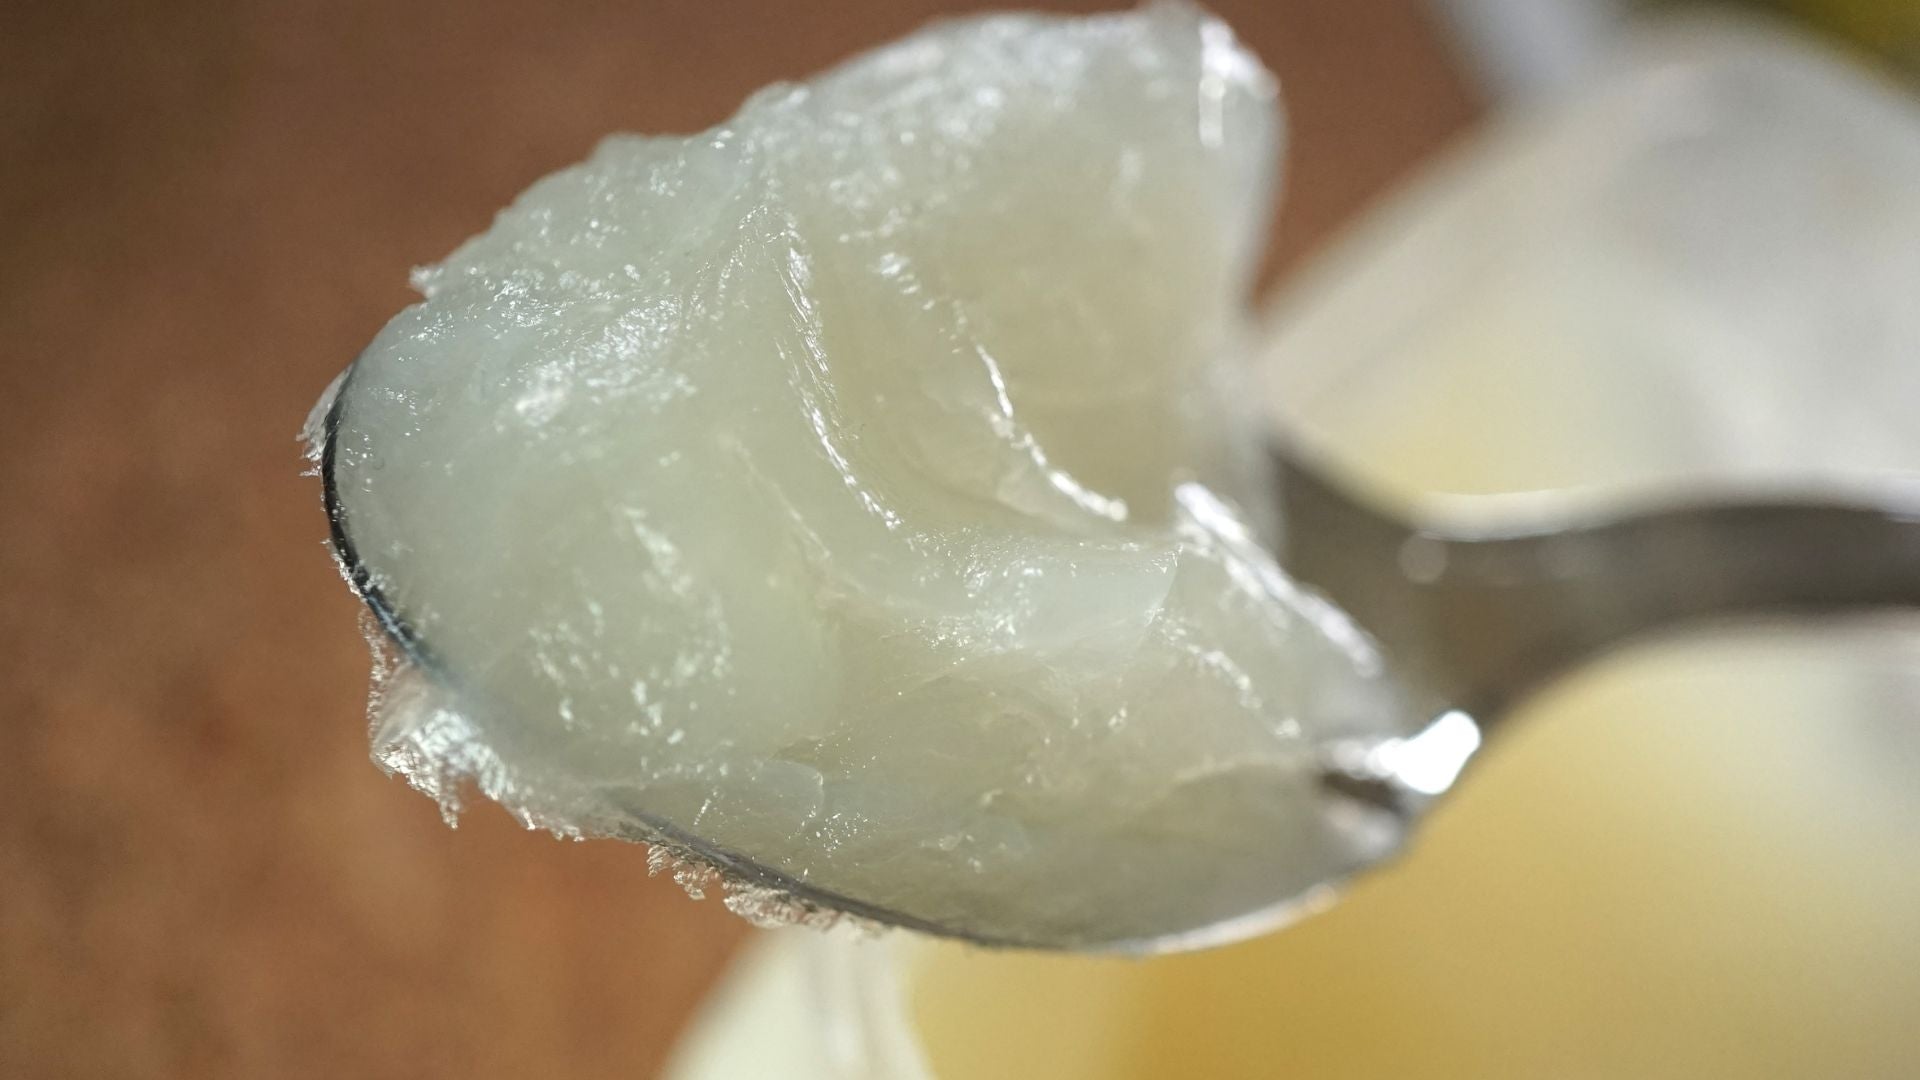 Petroleum jelly on a spoon